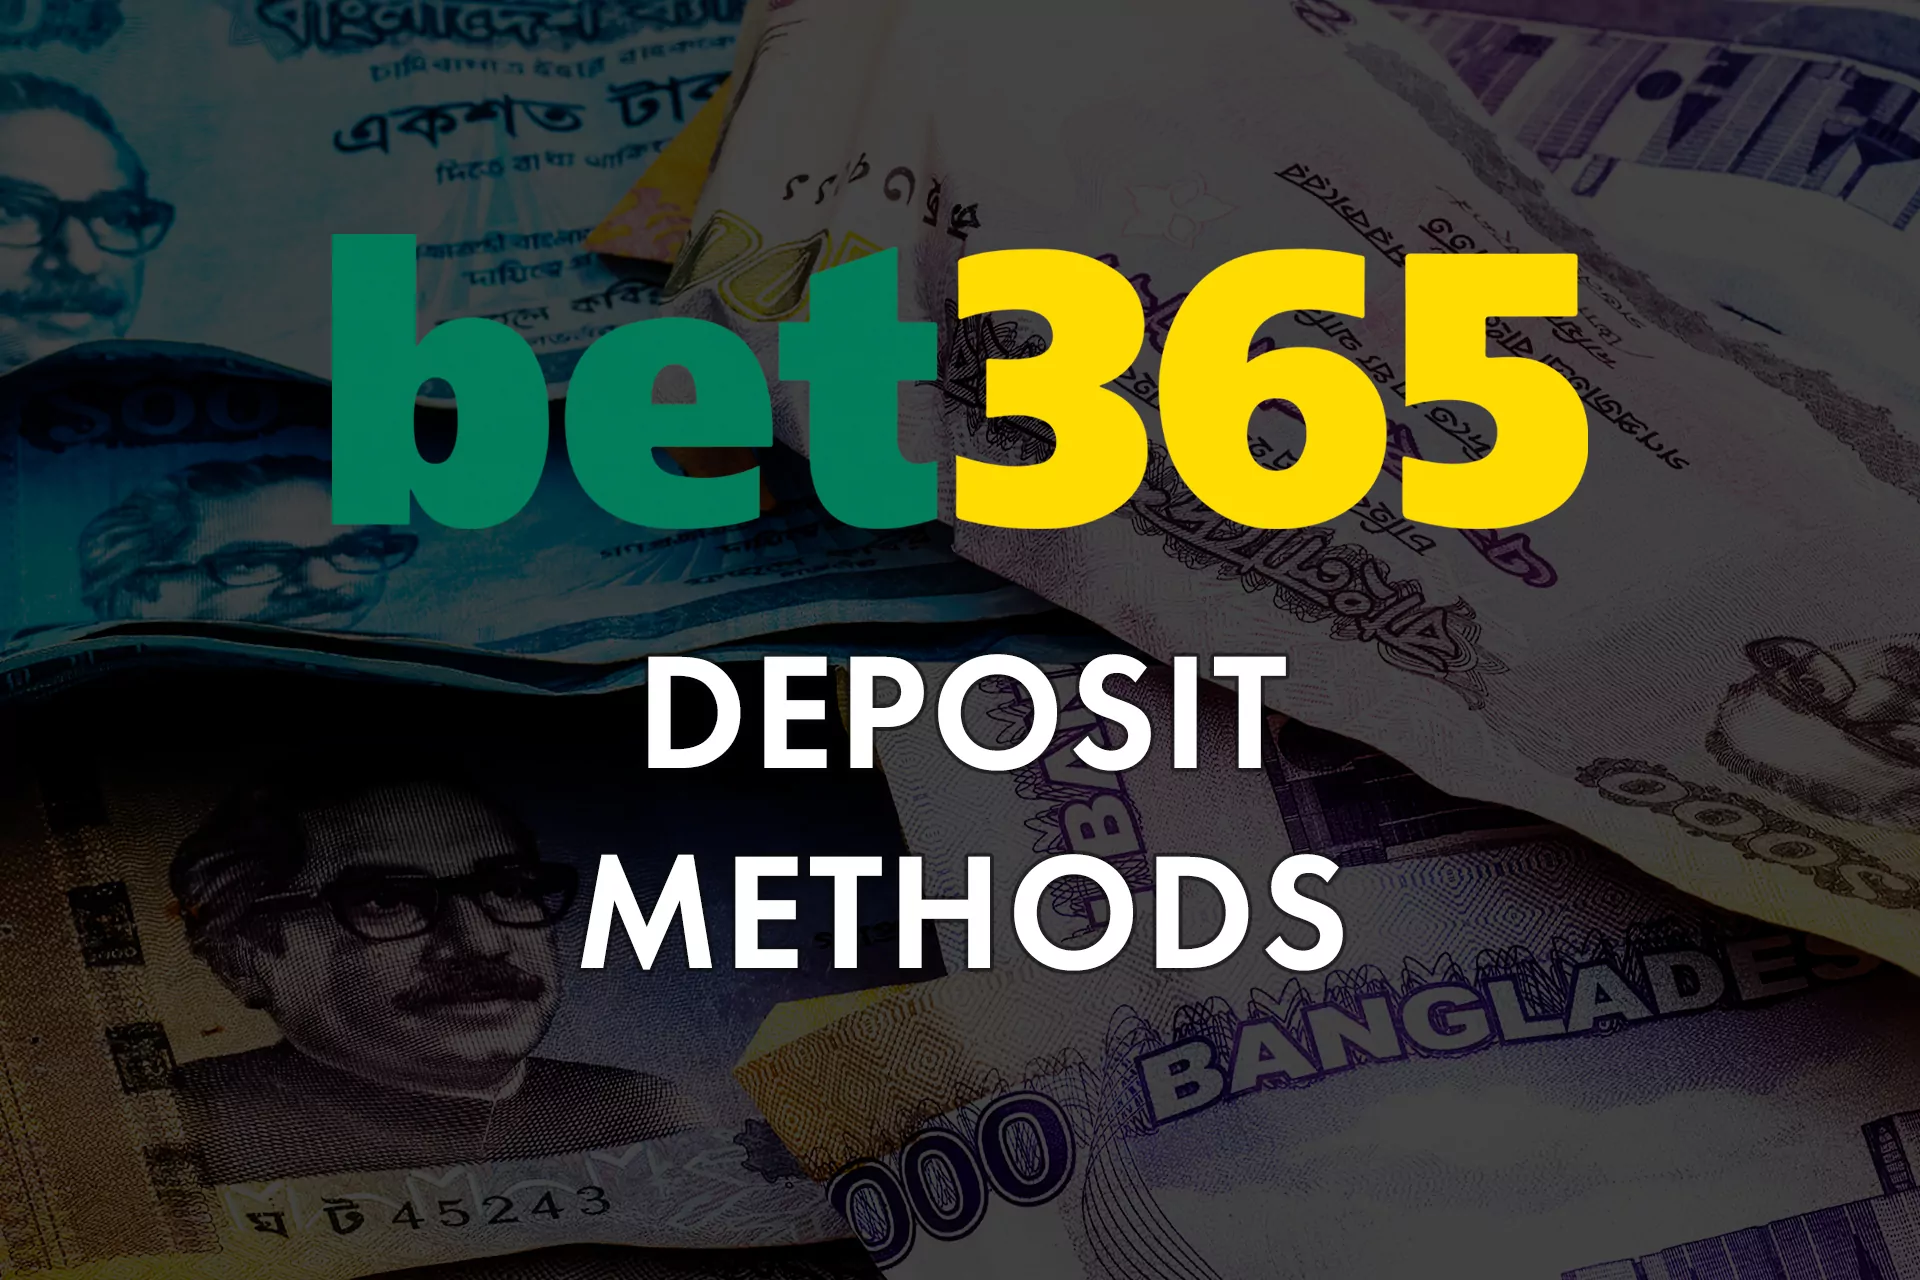 Use your bank card or e-wallet to make a deposit at bet365.